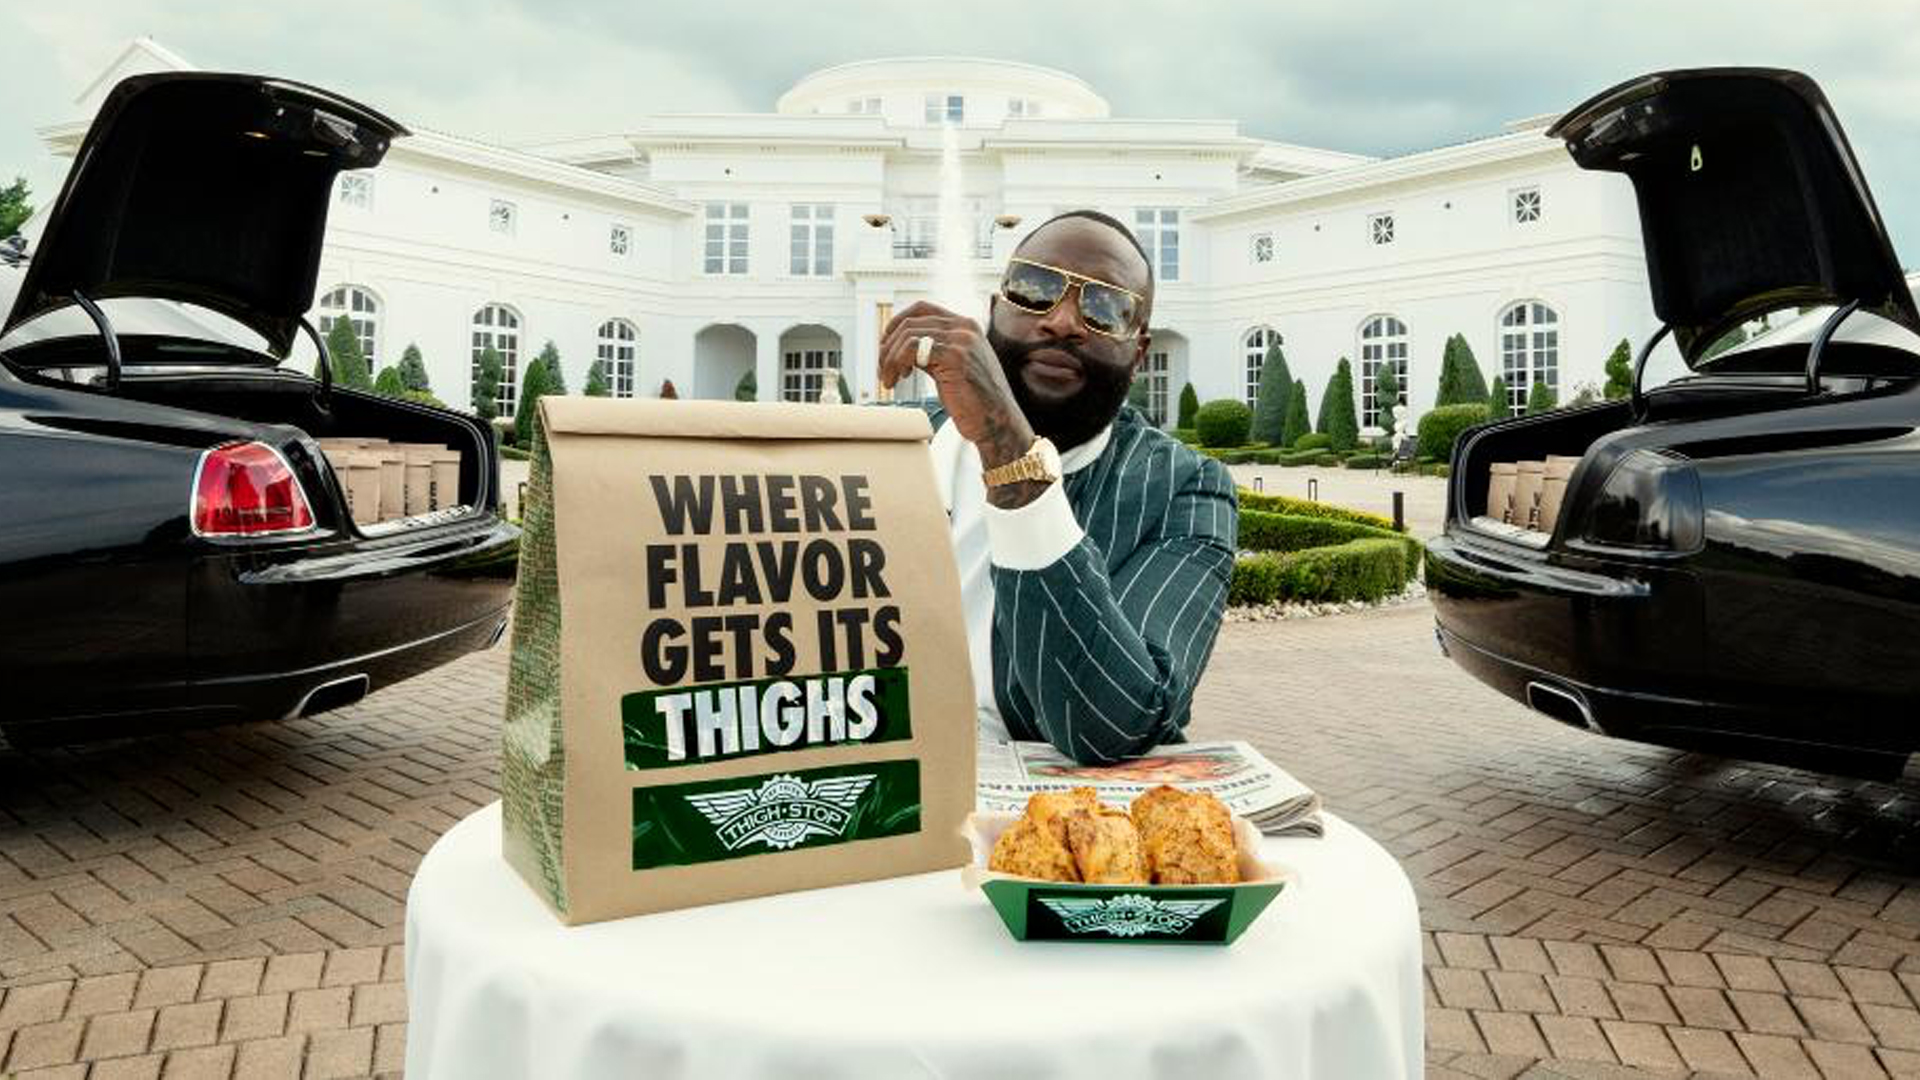 A New Trademark Filing Suggests You May Soon Be Able To Buy Chicken From Wingstop In The Metaverse